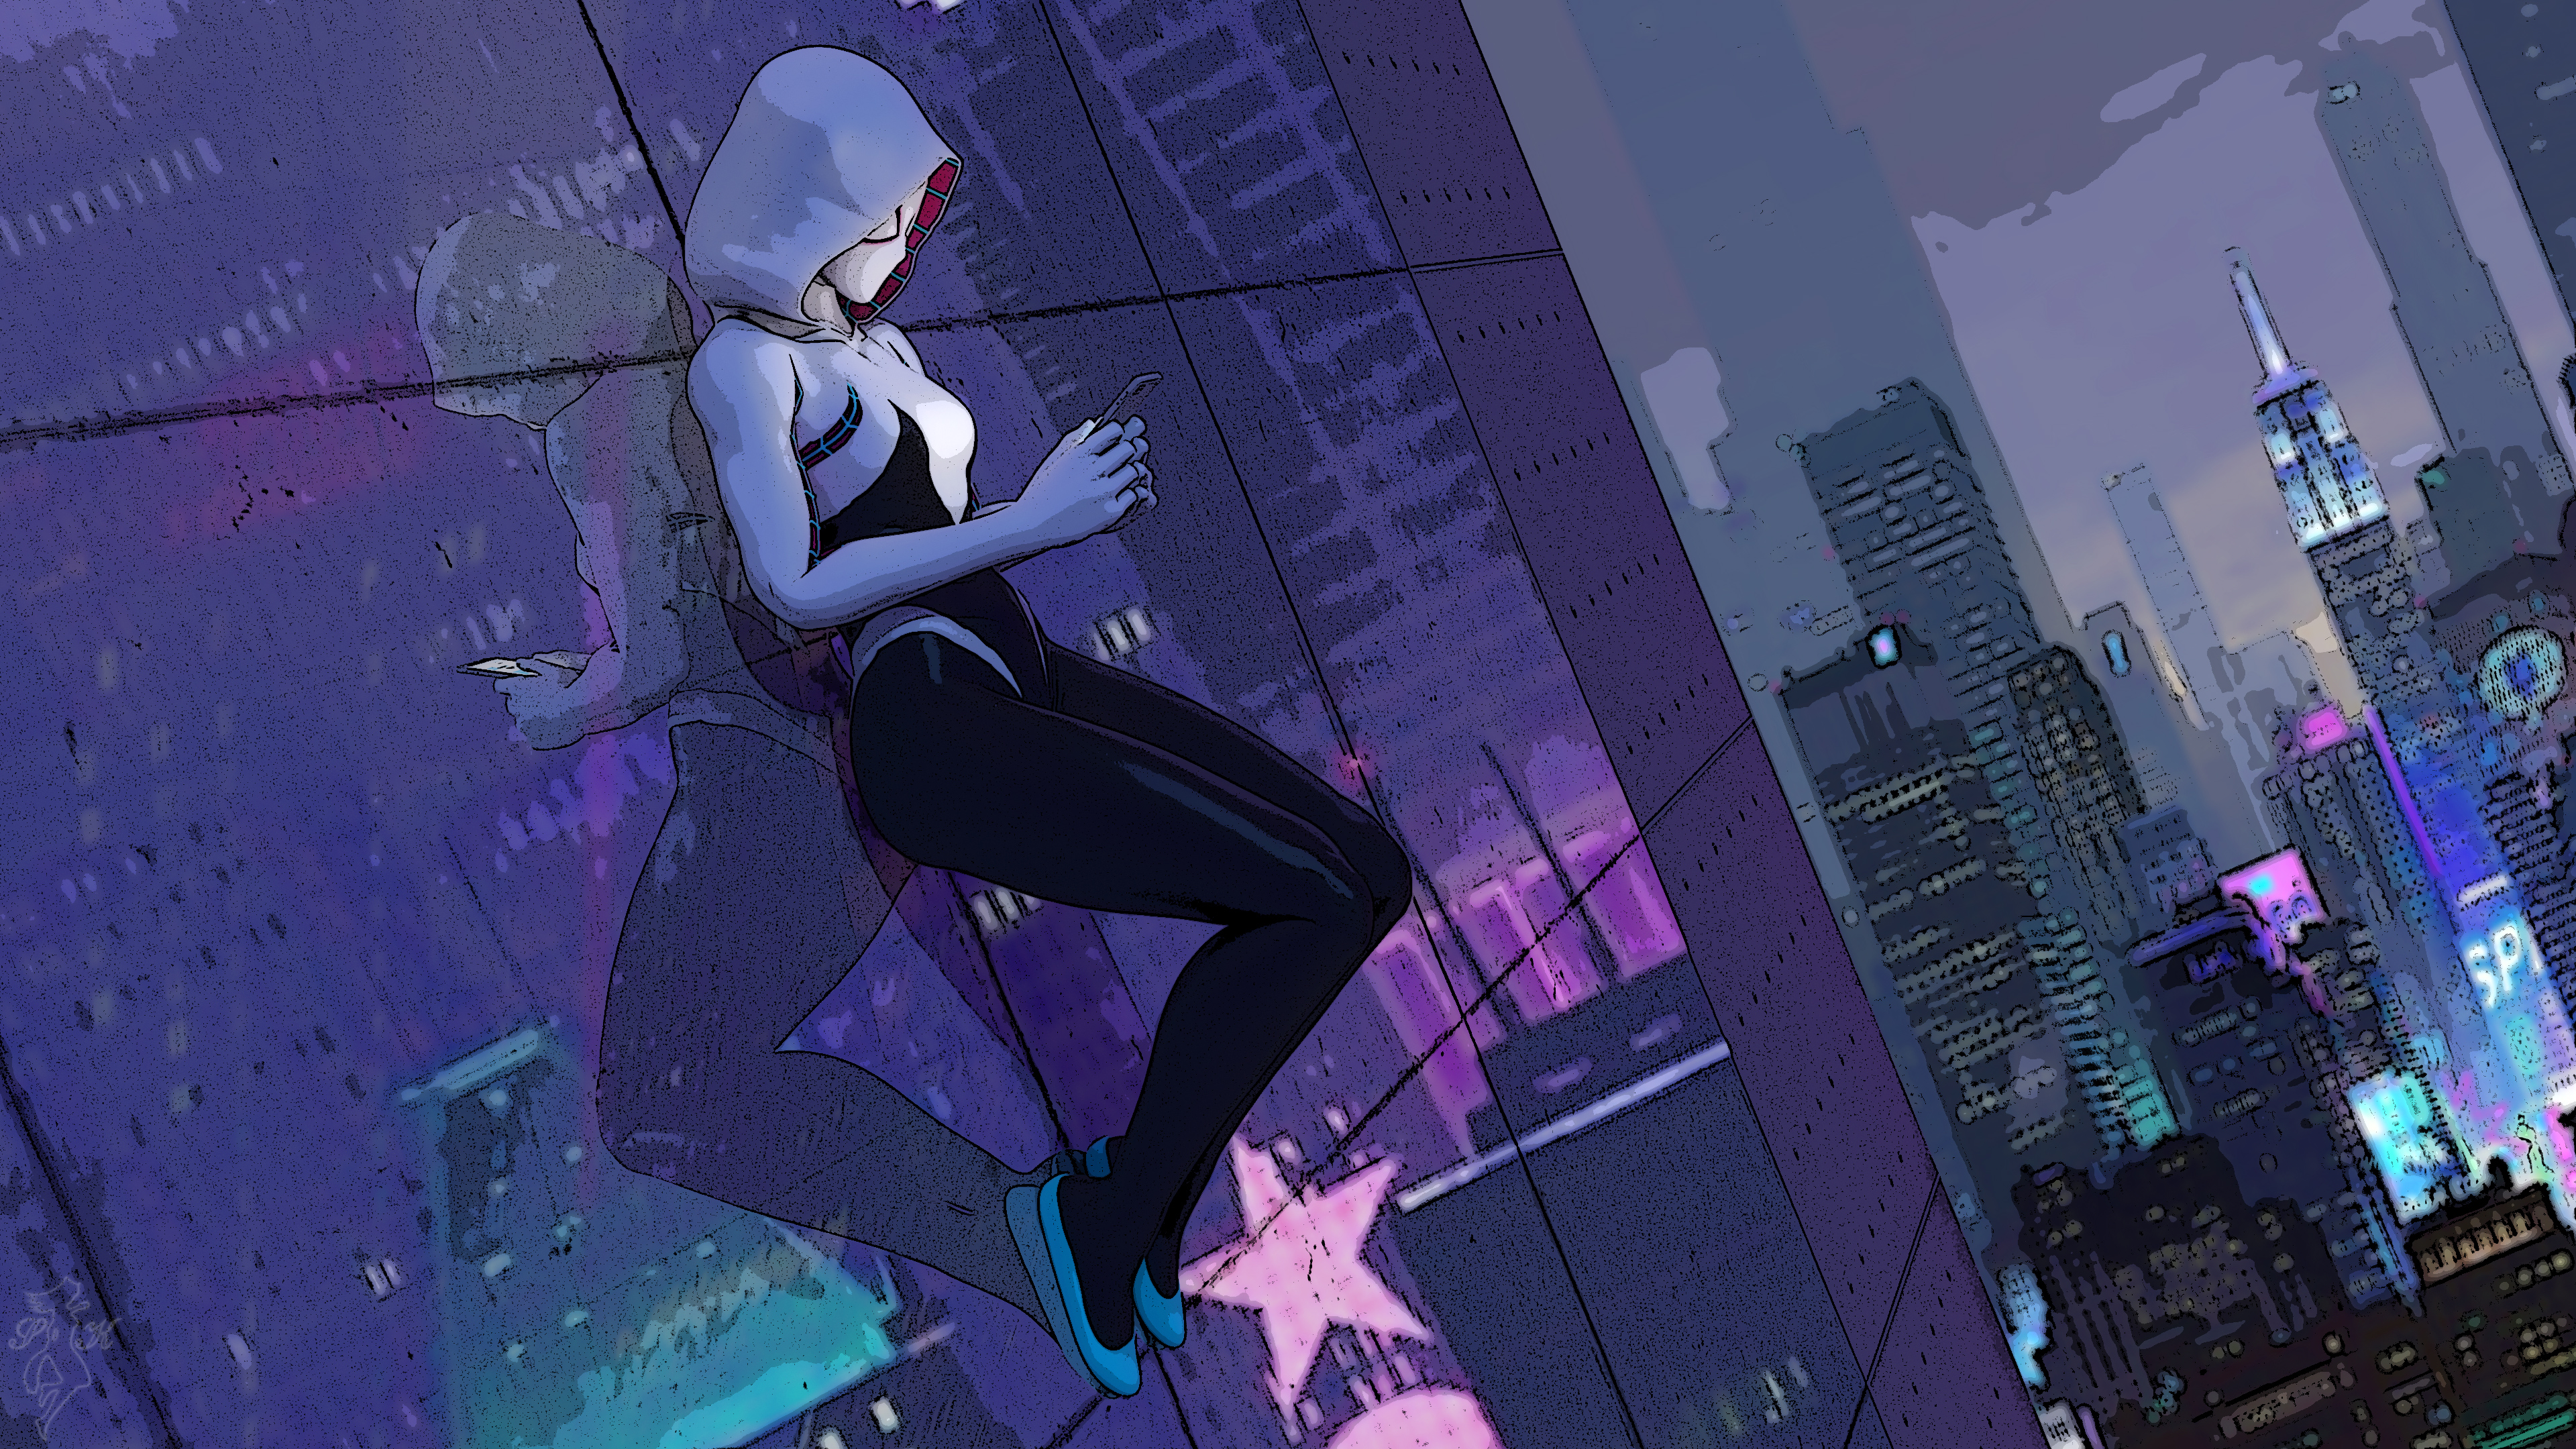 General 3840x2160 Spider-Woman Ghost Spider phone tight clothing digital art Gwen Stacy Spider Gwen holding phone building looking at smartphone city reflection against glass hoods city lights night Marvel Comics superheroines skyscraper